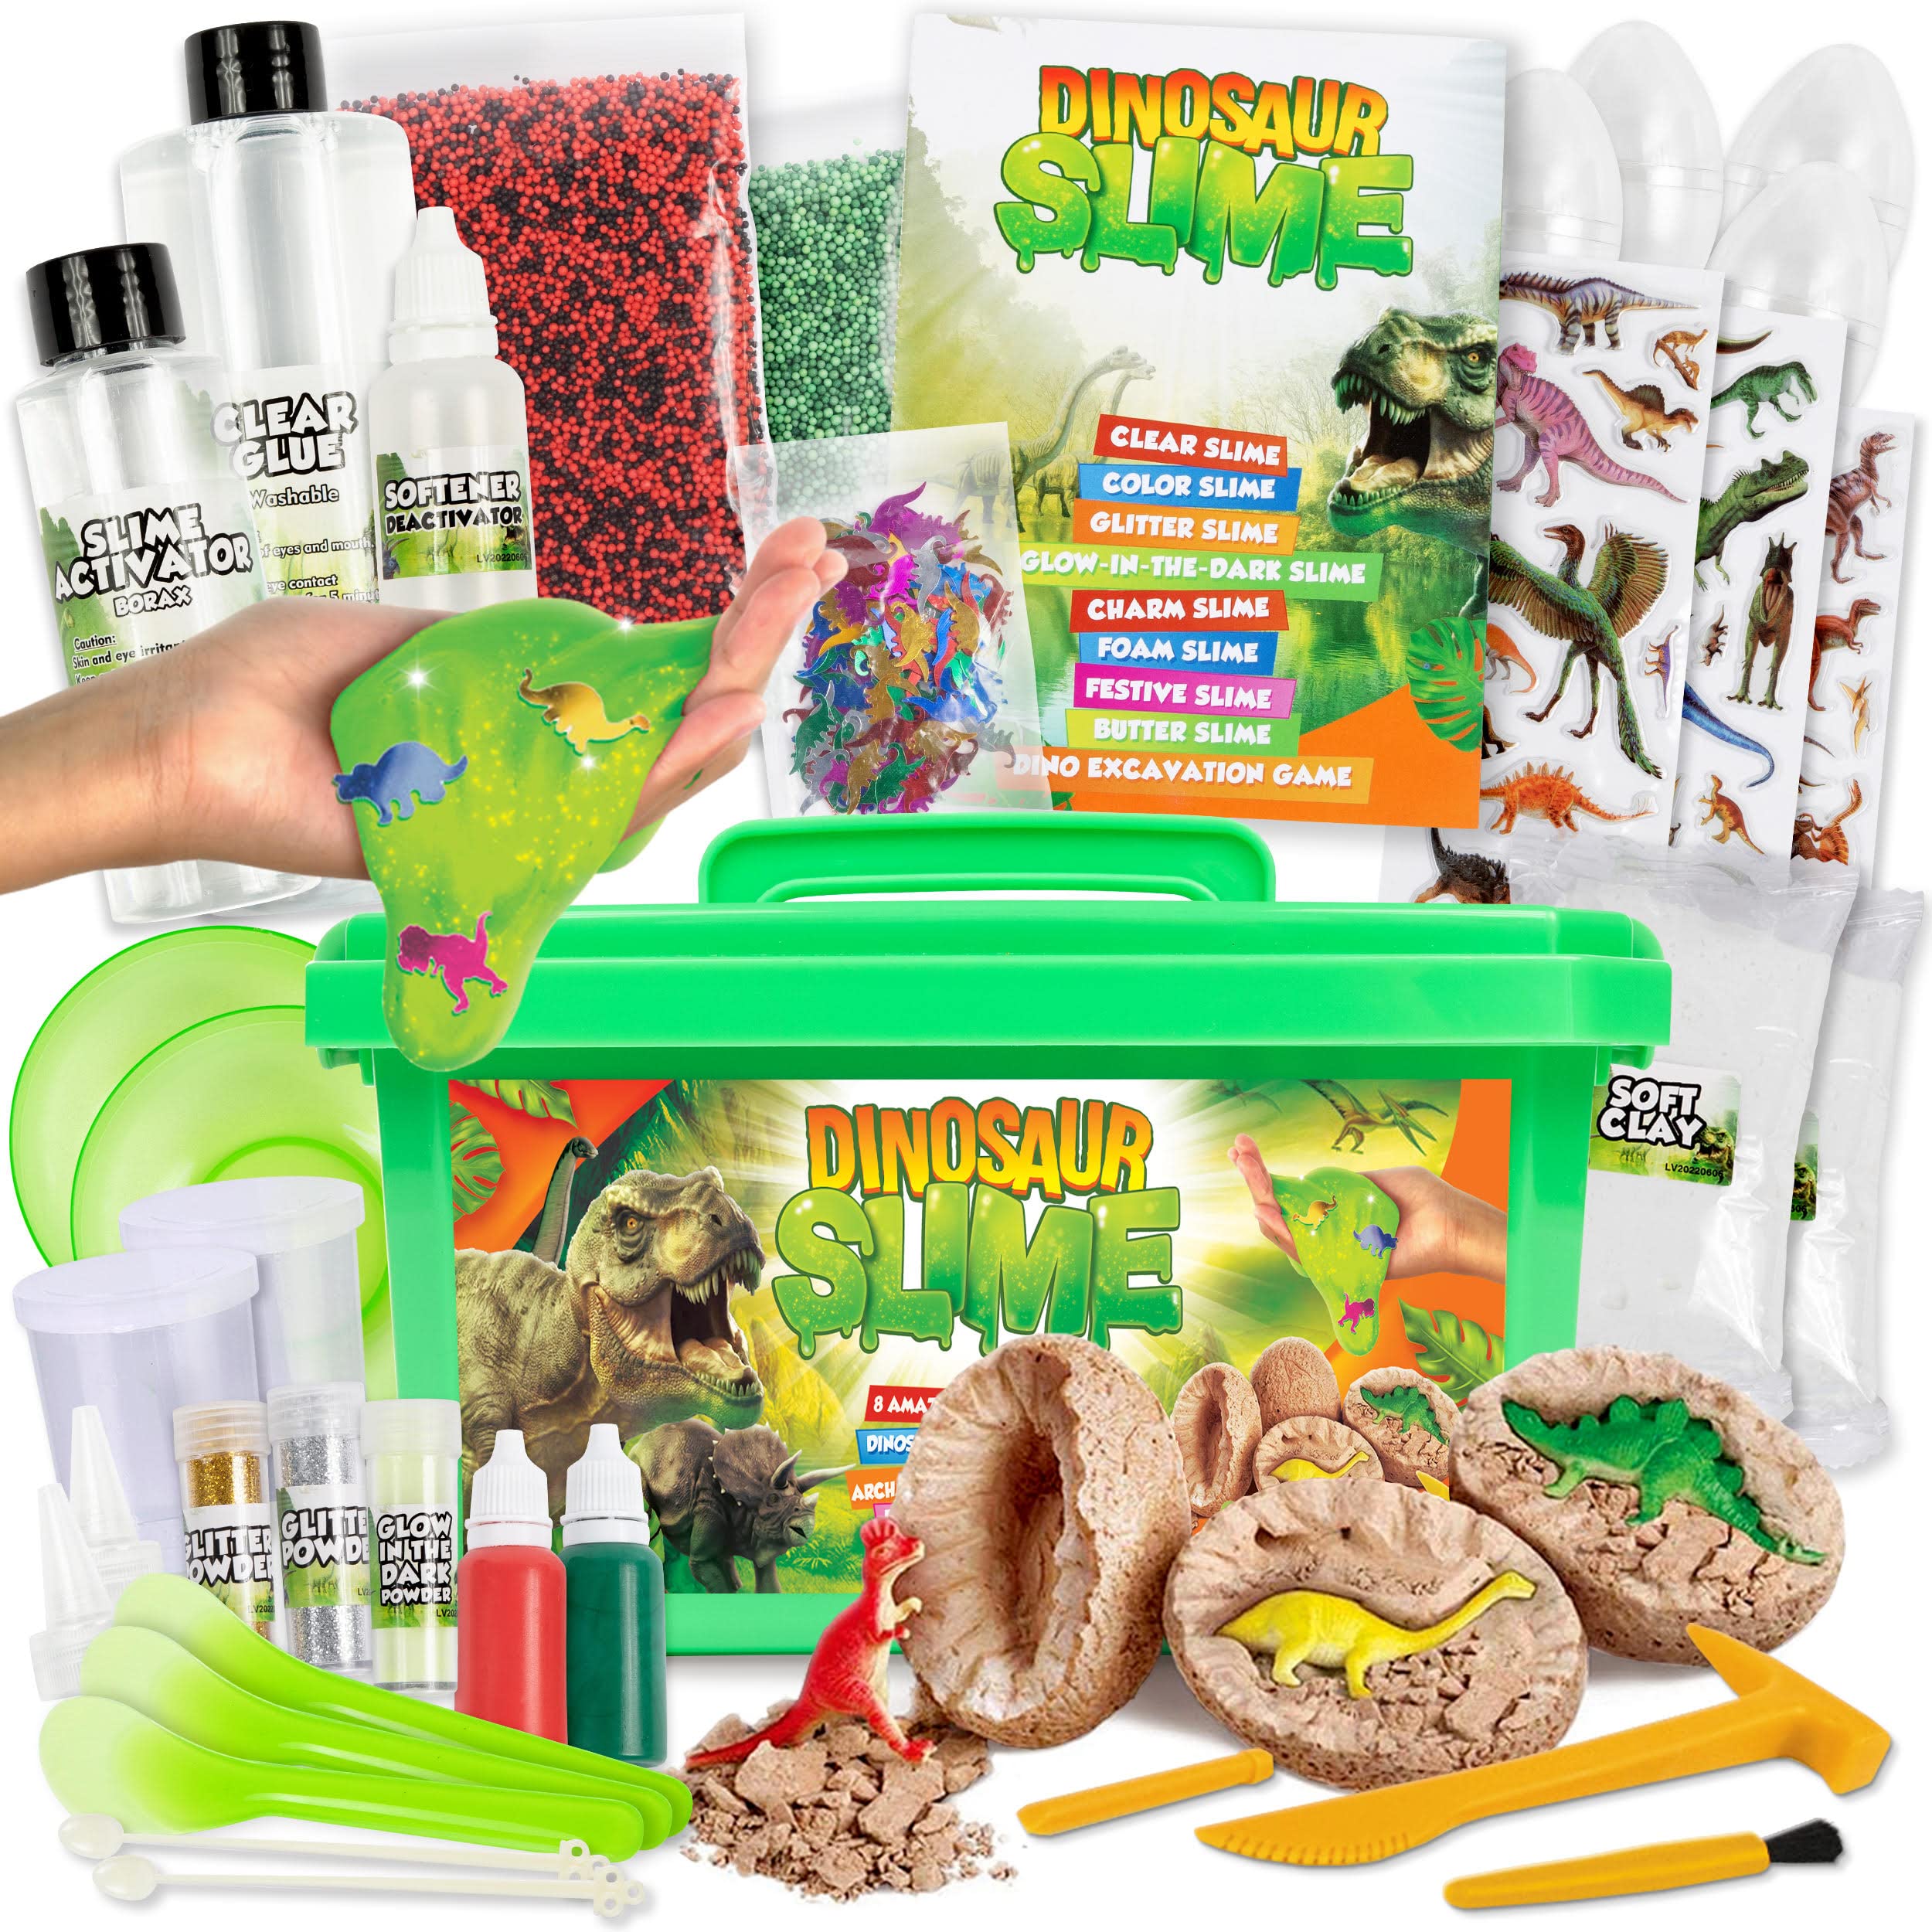 Laevo Slime Kit - DIY Slime Kits - Supplies Makes Butter Slime, Cloud Slime, Clear Slime & More Sets - Toys for 5+ Years Old  - Like New